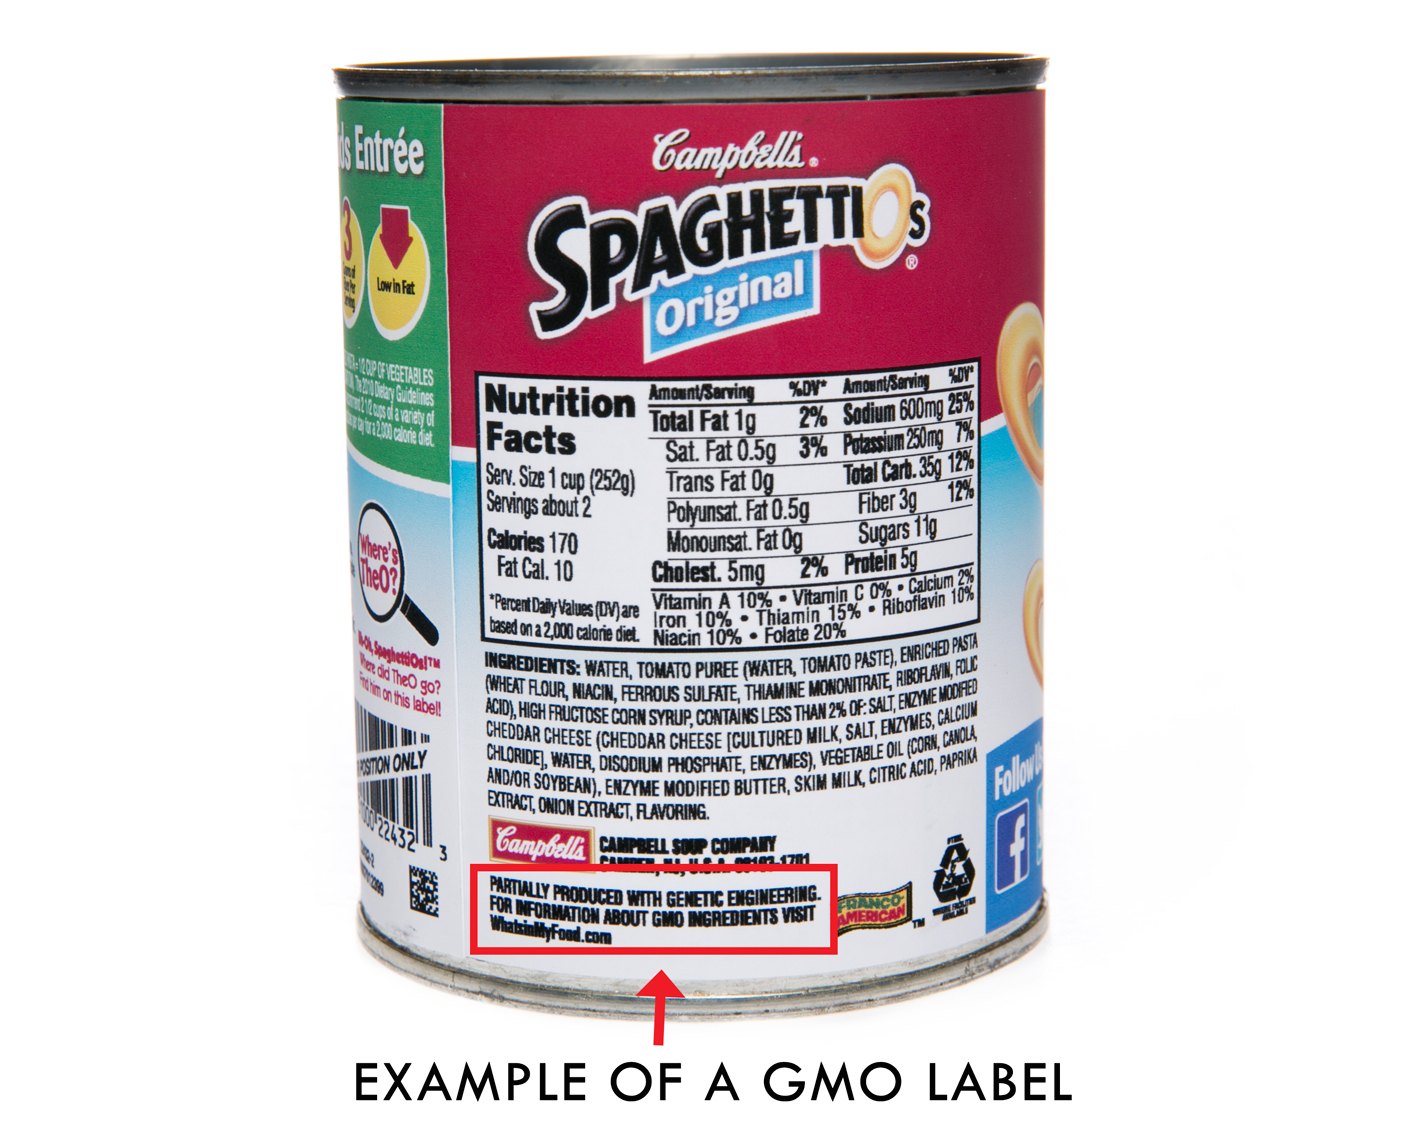 This is how Campbell's GMO-containing are labeled in Vermont. The language used on its eventual nationwide label may end up being different.